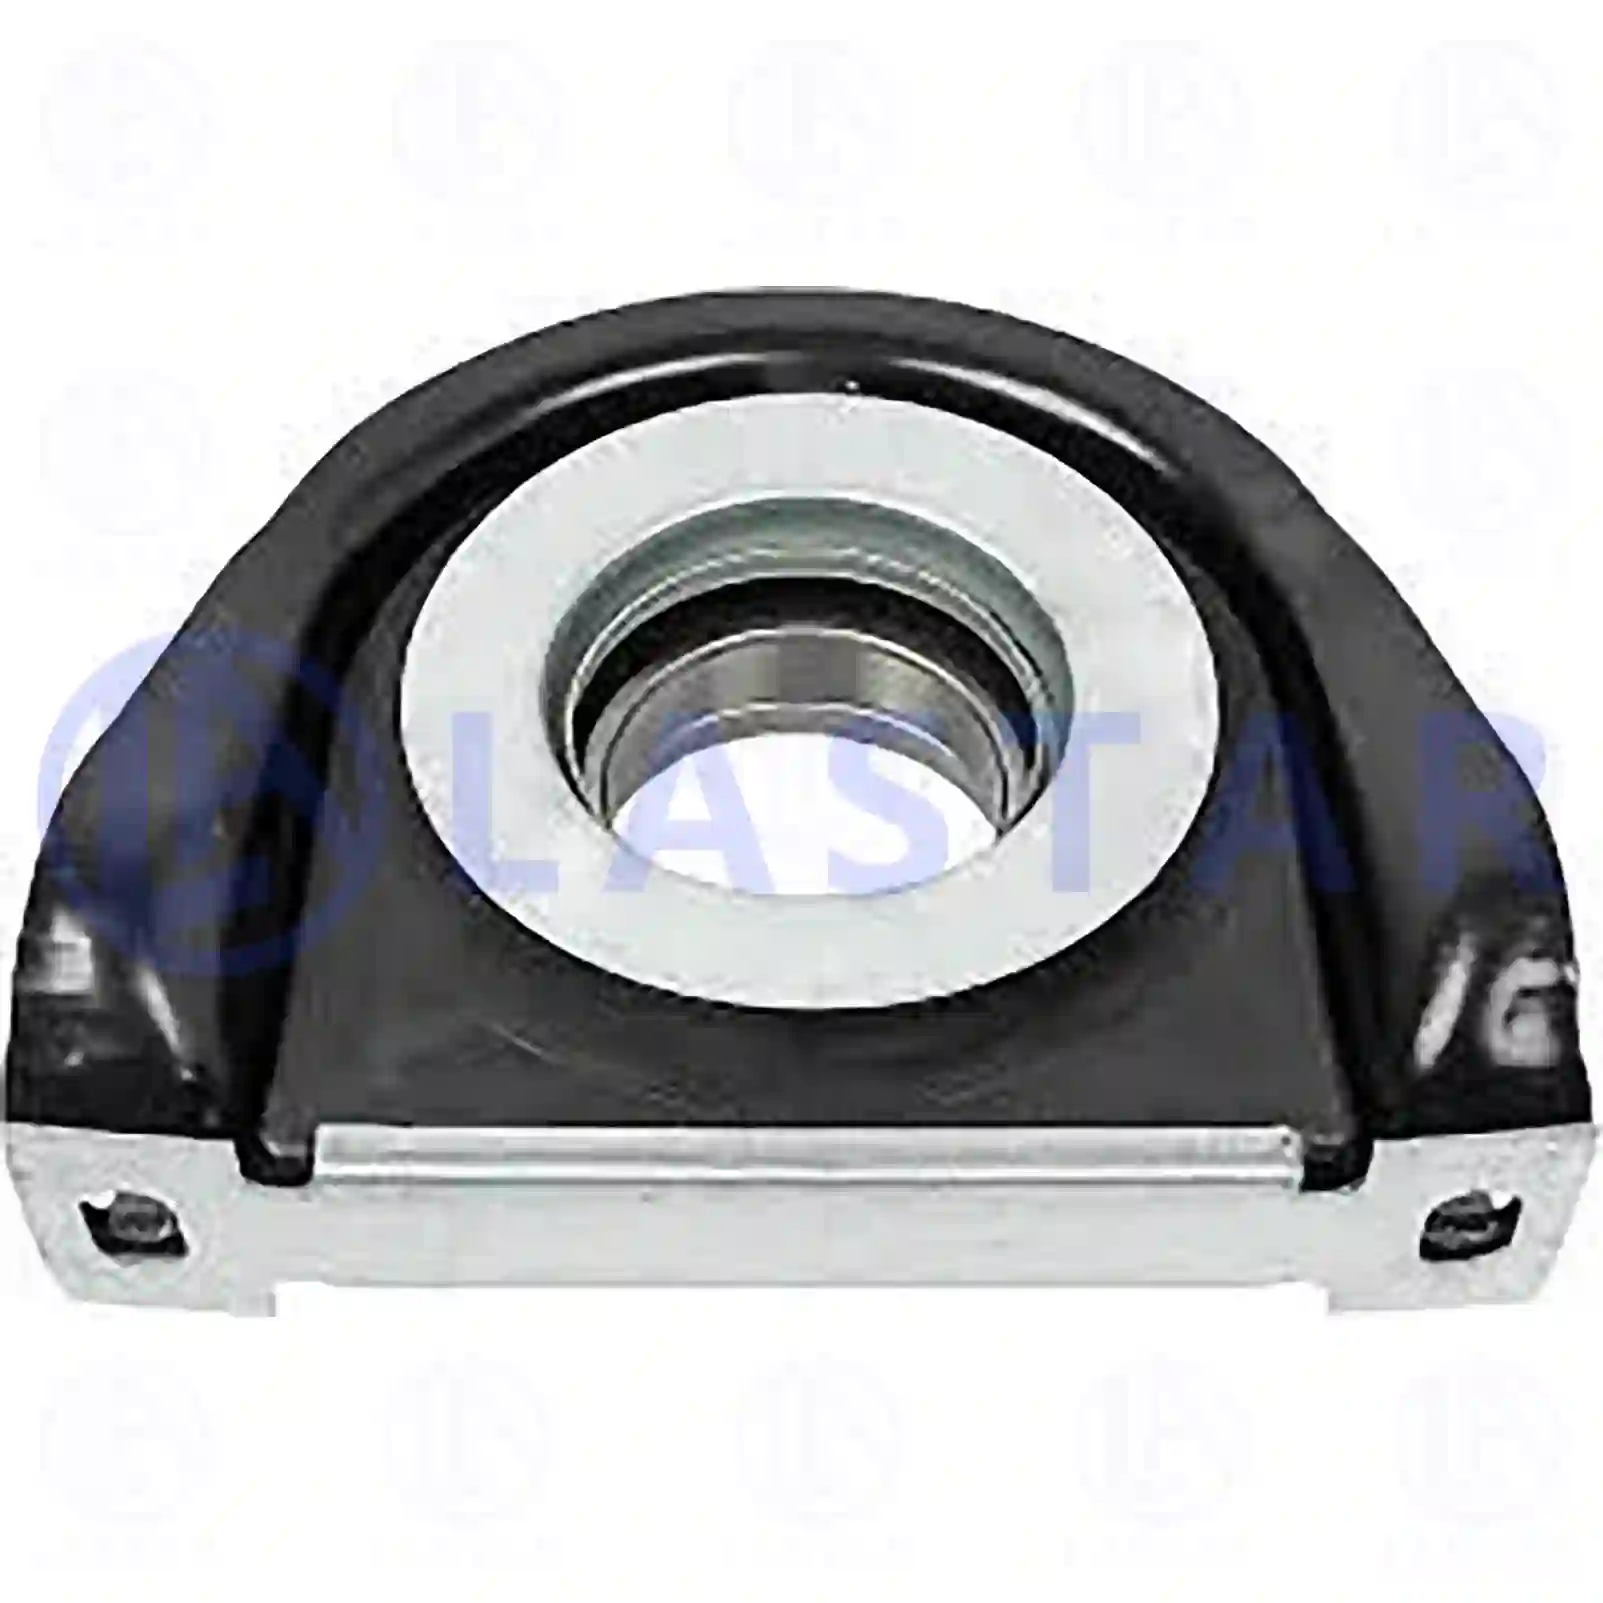 Support Bearing Center bearing, la no: 77734127 ,  oem no:42087542, 42536963, 42541437, 42560645, 93163689, 93190884, 1068222, 20471428, ZG02474-0008 Lastar Spare Part | Truck Spare Parts, Auotomotive Spare Parts